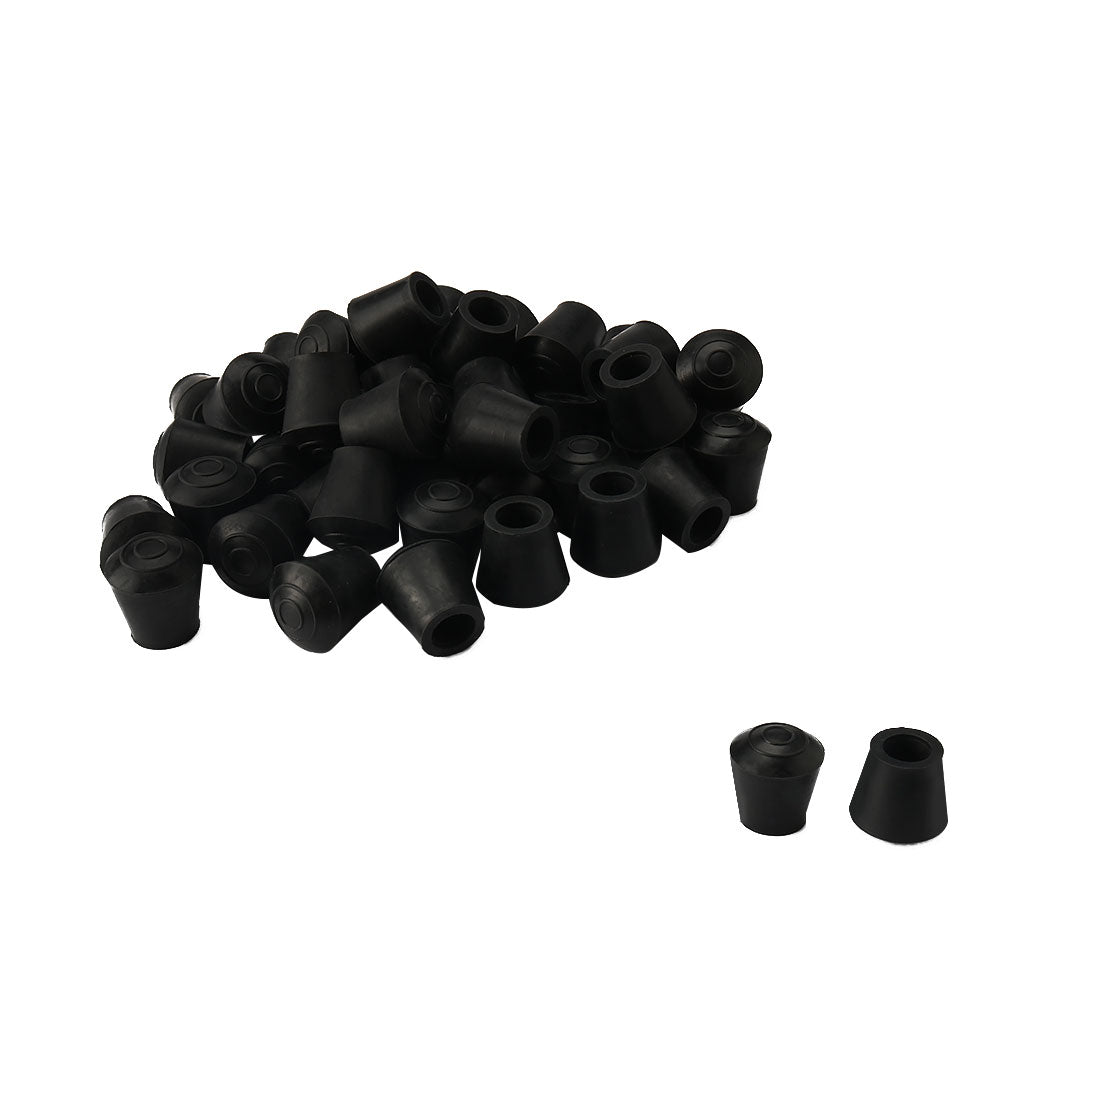 uxcell Uxcell Rubber Leg Cap Tip Cup Feet Cover 10mm 3/8" Inner Dia 34pcs for Furniture Chair